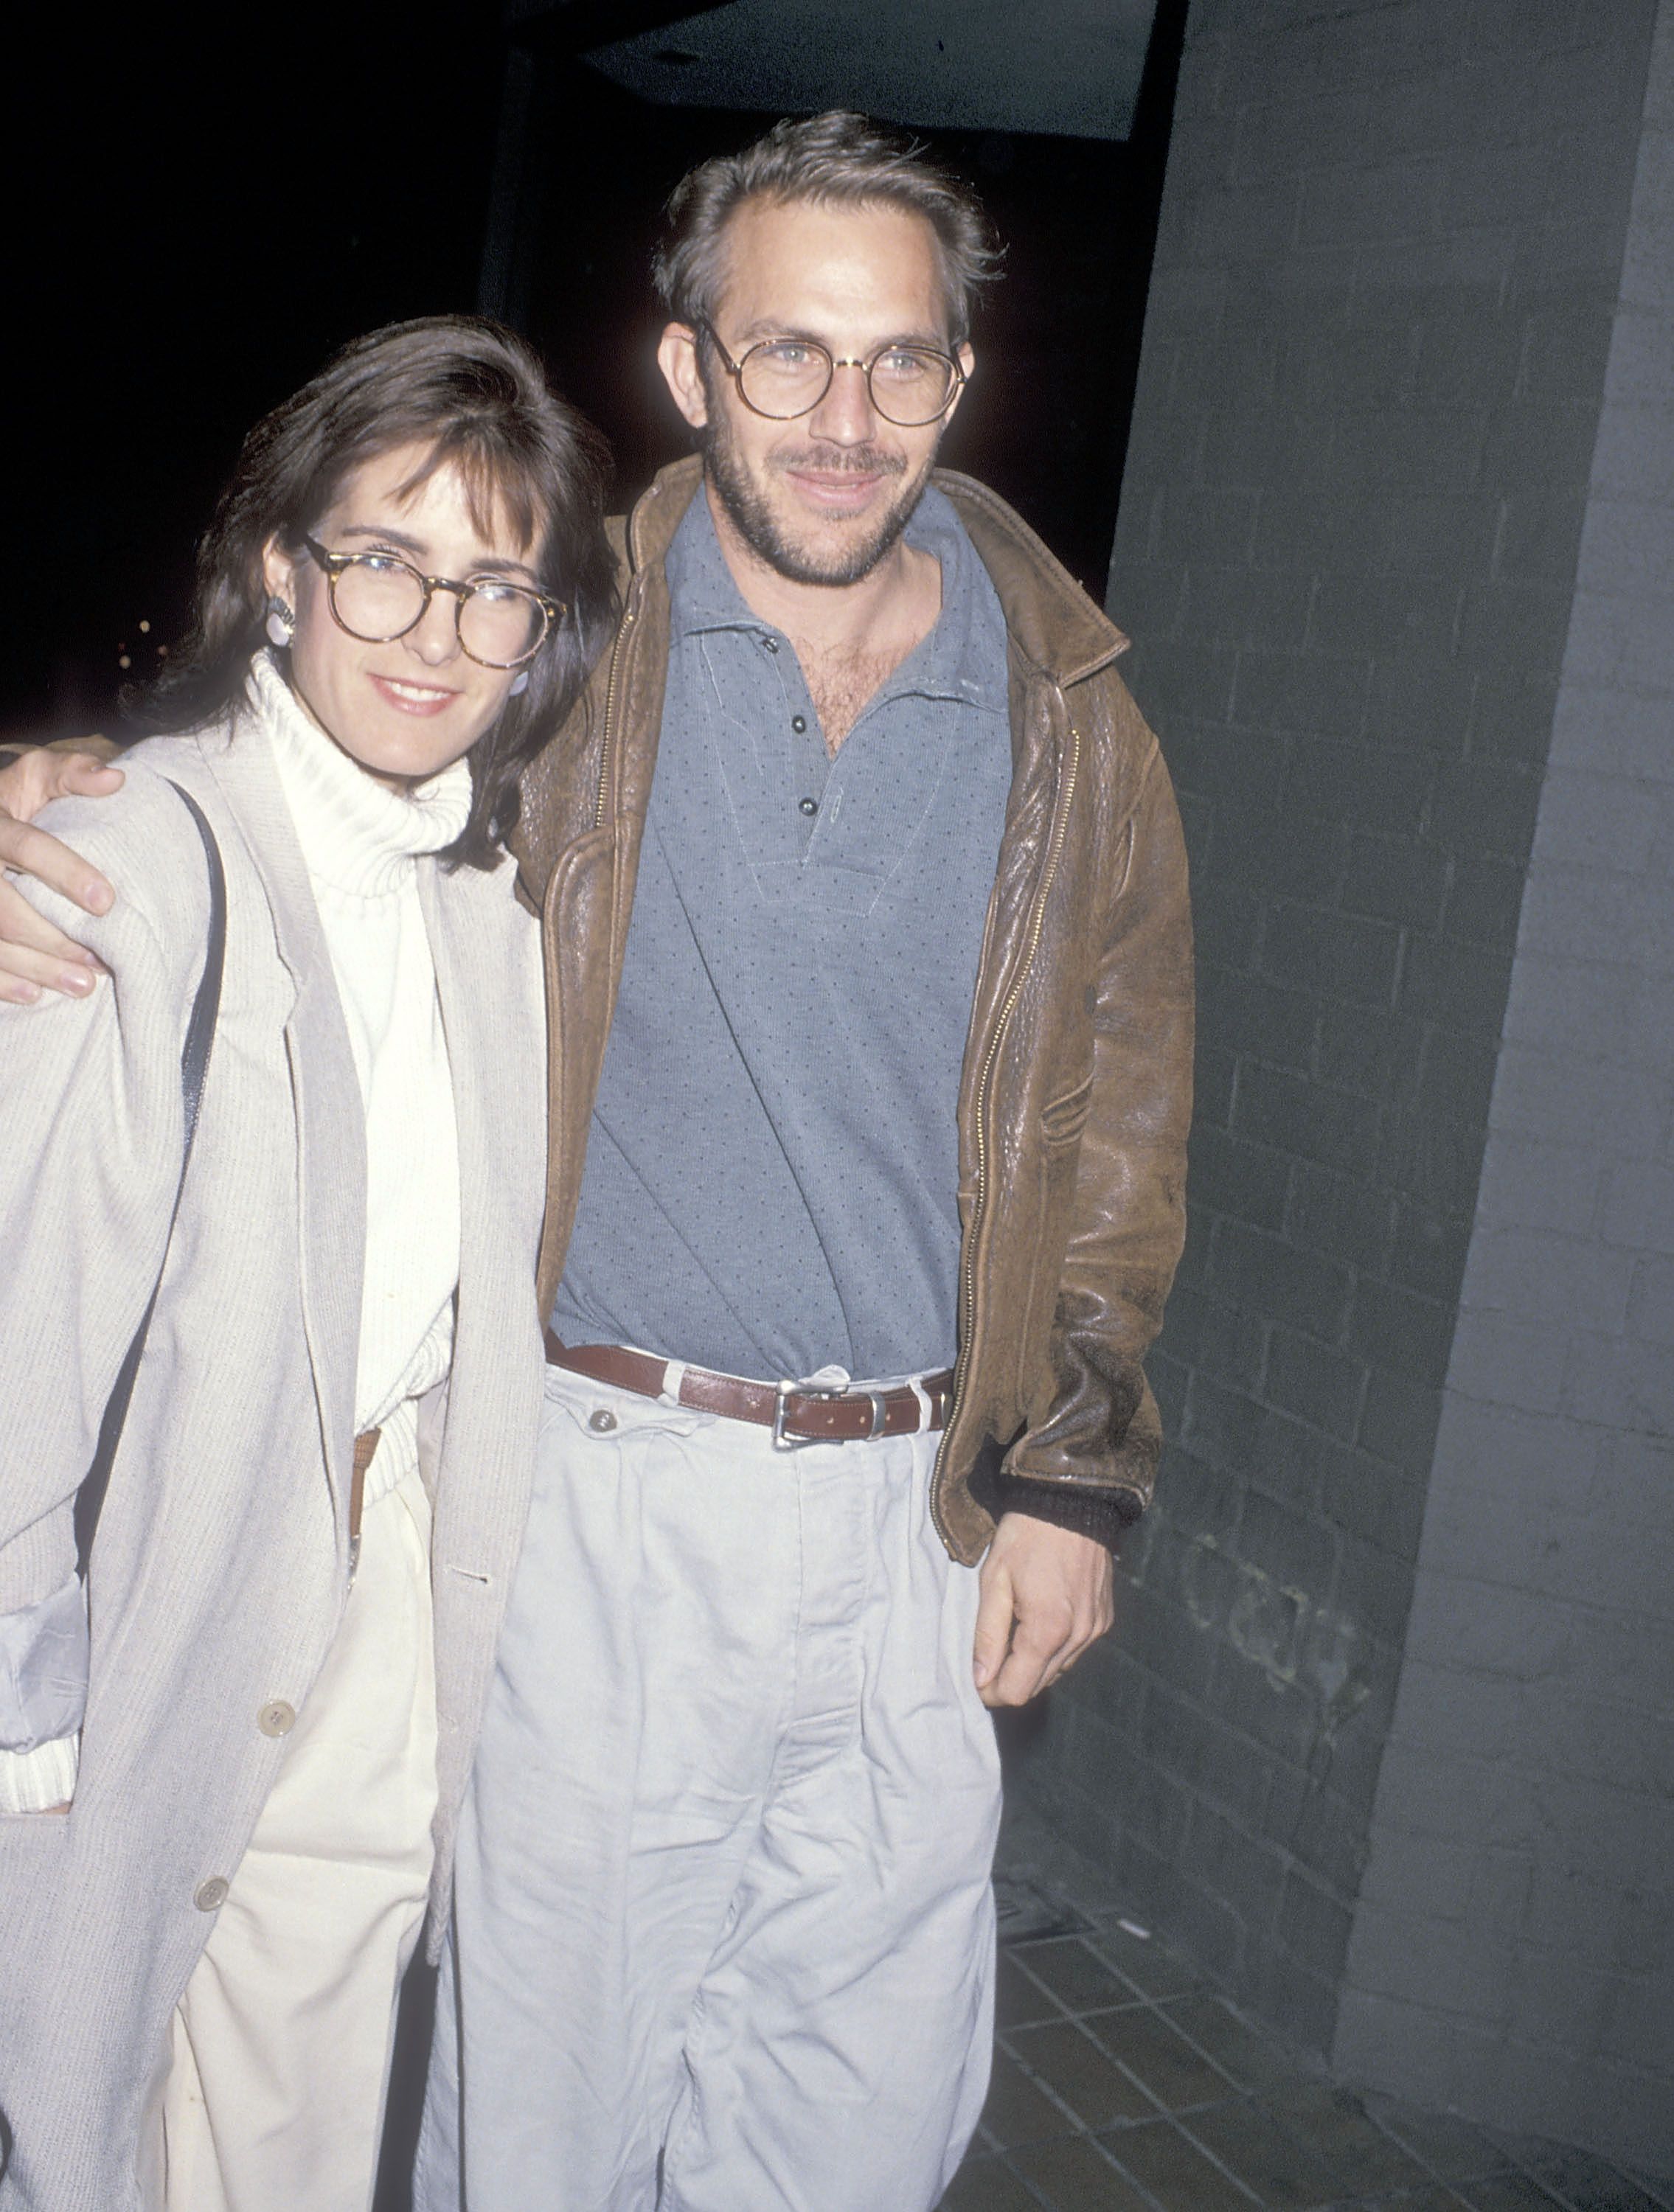 Kevin Costner and wife Cindy Costner attend a performance of the play "Hurlyburly" on January 13, 1989 at the Westwood Playhouse in Westwood, California. | Source: Getty Images